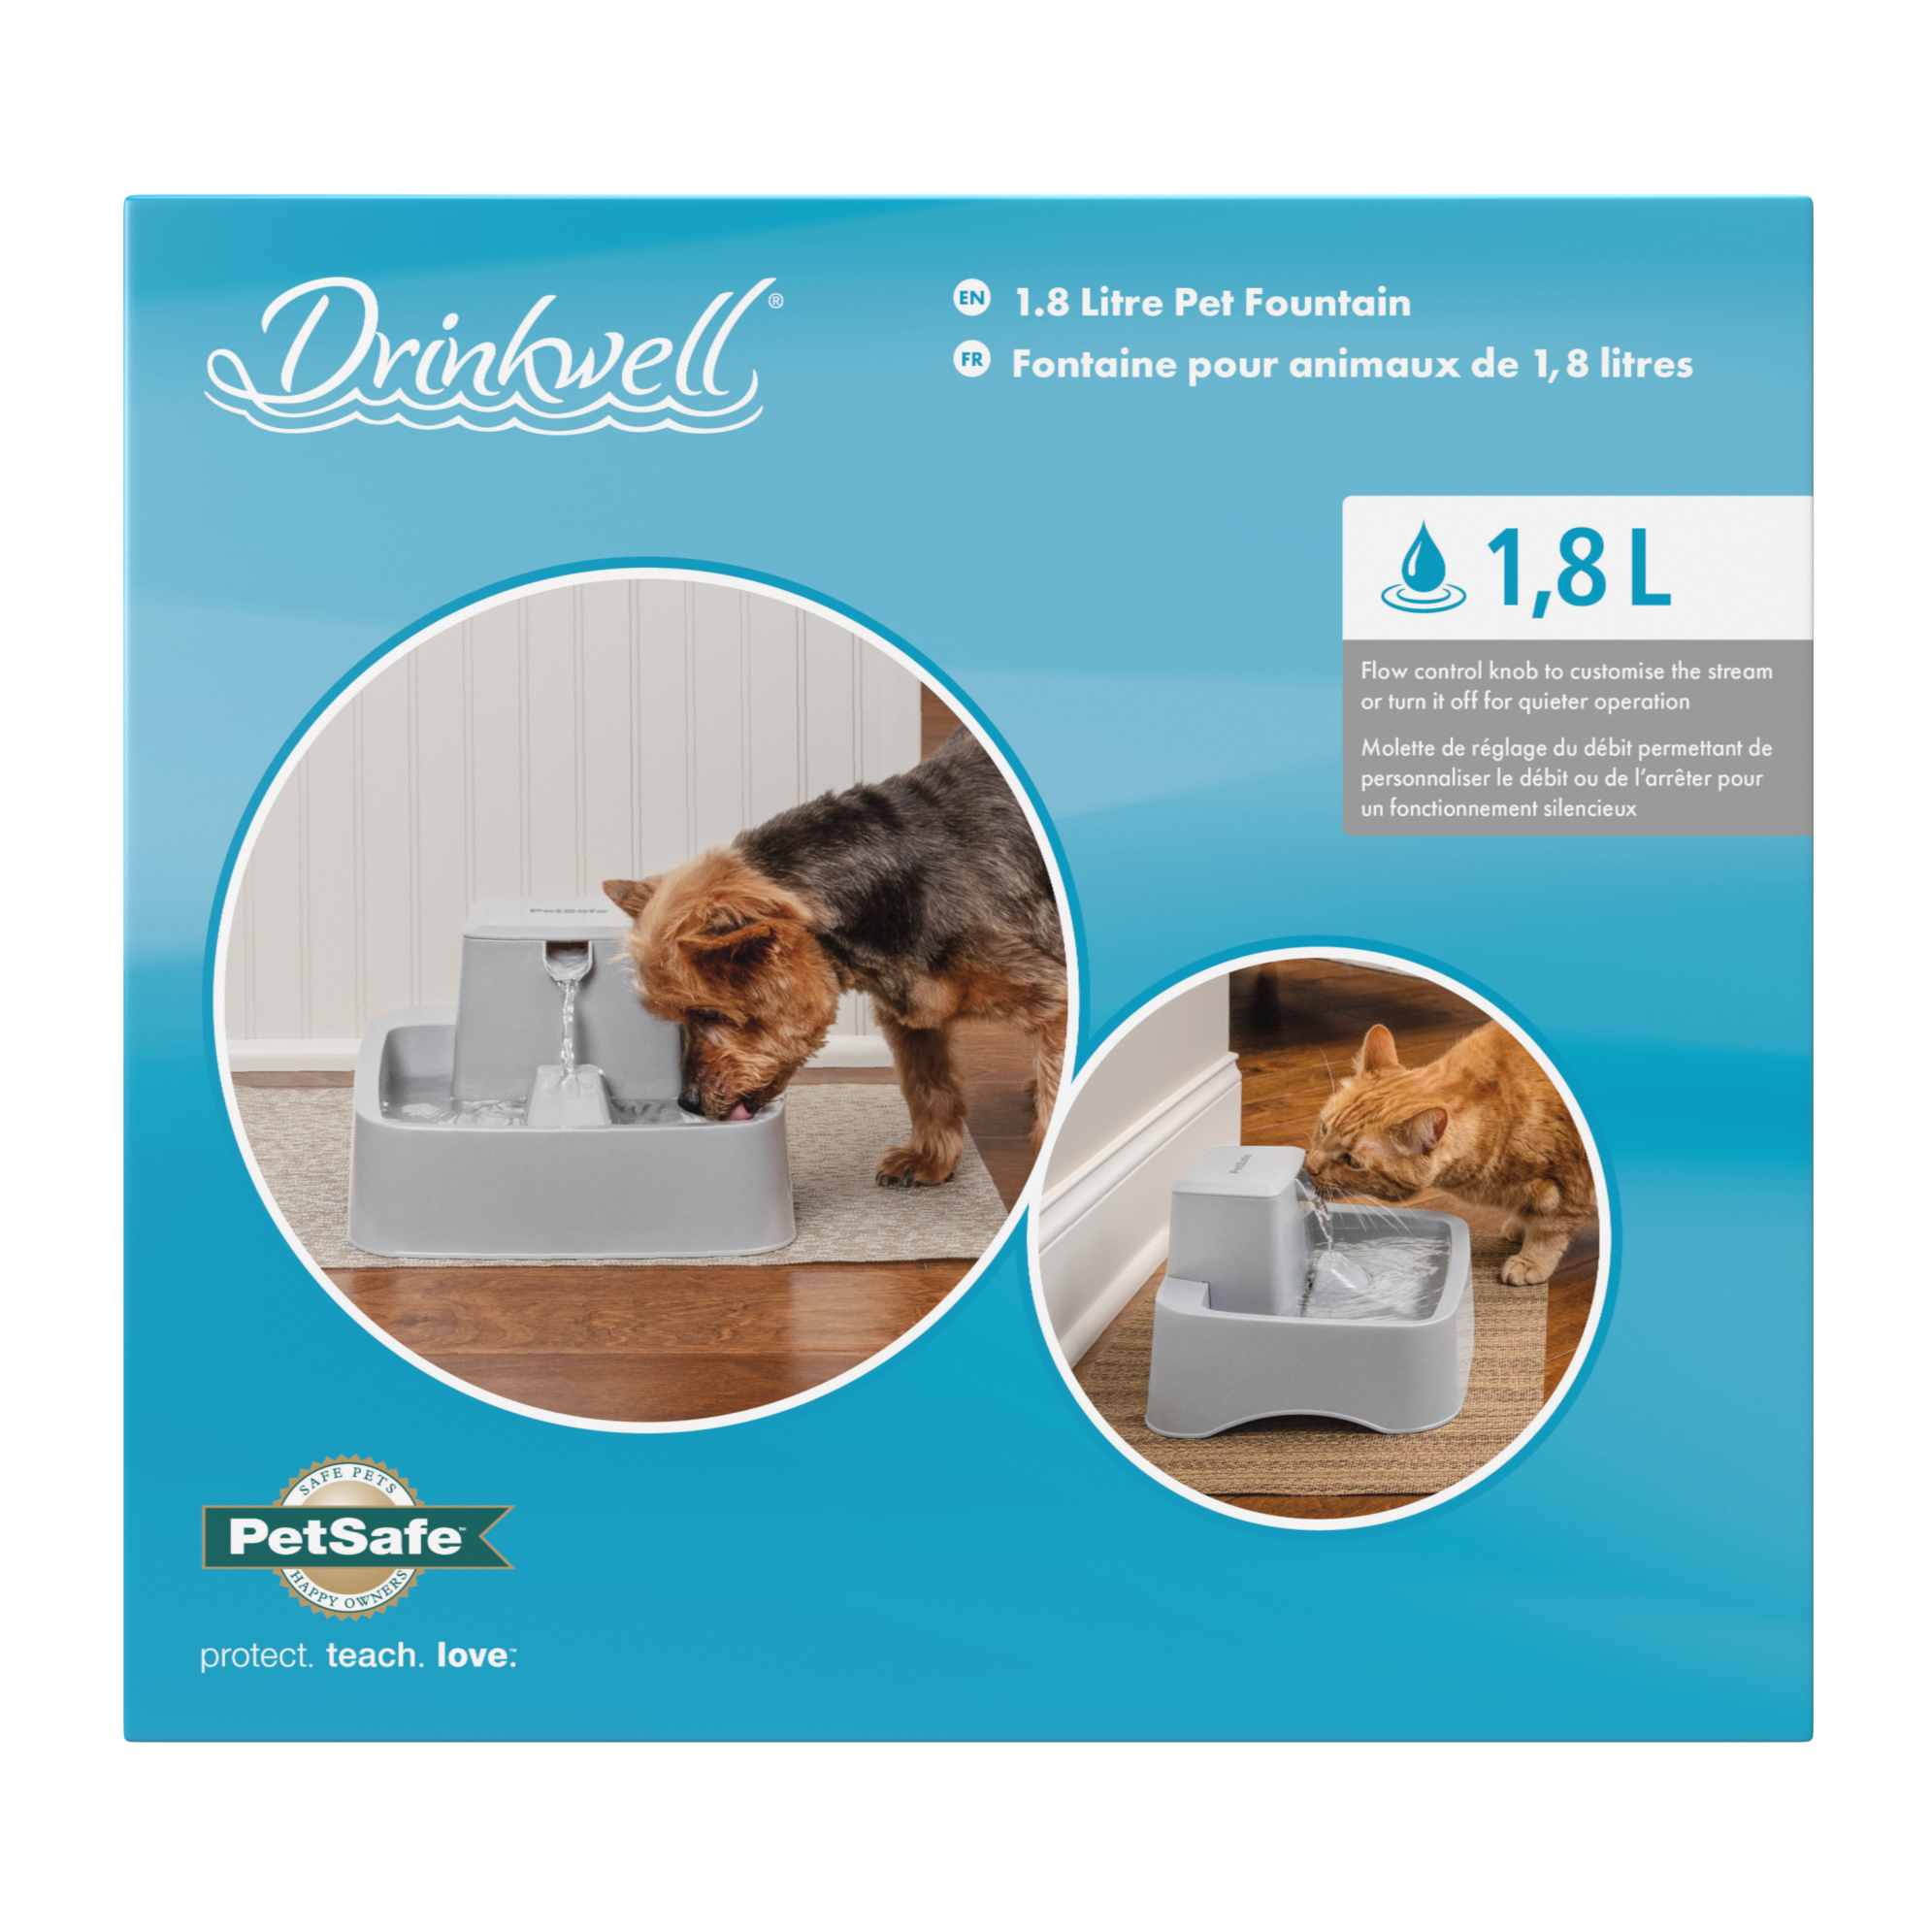 Fontaine pour animaux de 1,8 litres Drinkwell®